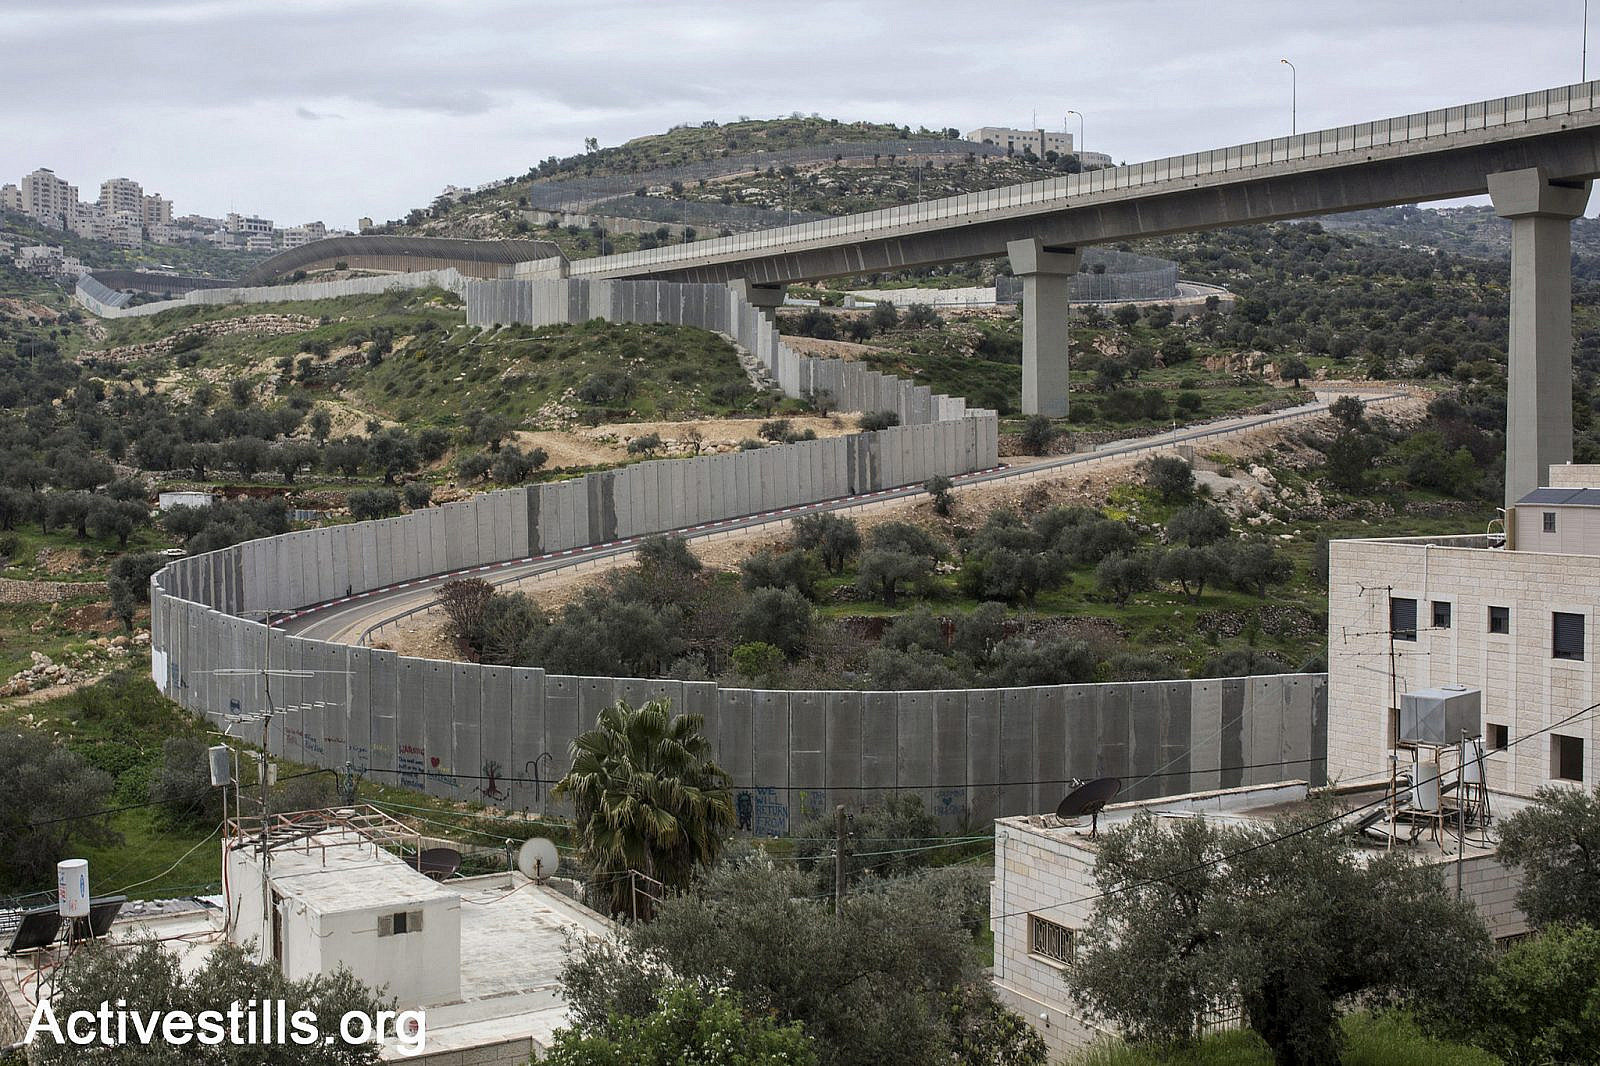 A section of the Israeli separation wall that annexes lands of Bethlehem and Jerusalem districts, Beit Jala, West Bank. April 6, 2019. (Anne Paq/Activestills )